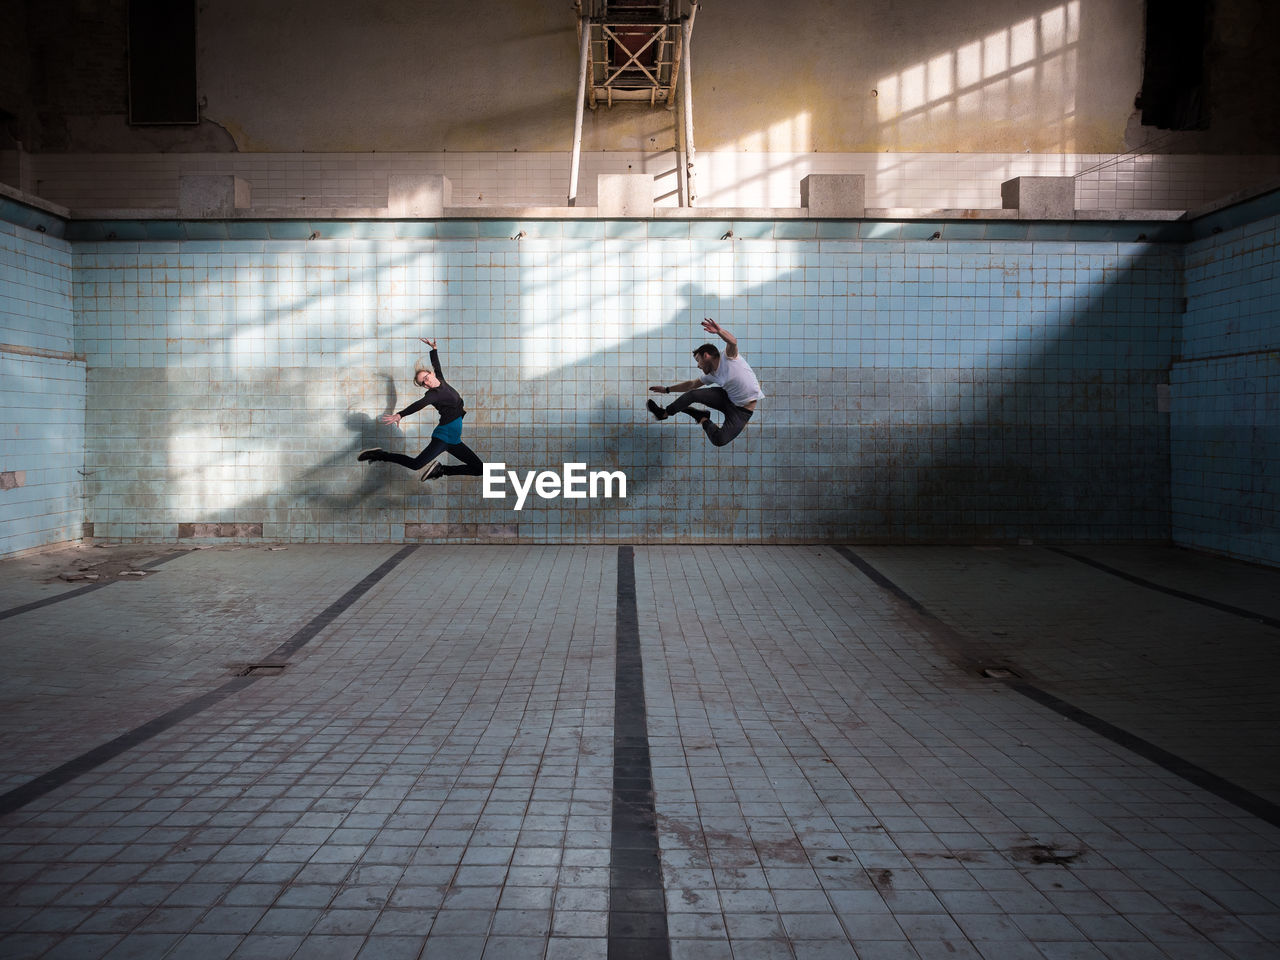 Friends jumping in abandoned empty swimming pool